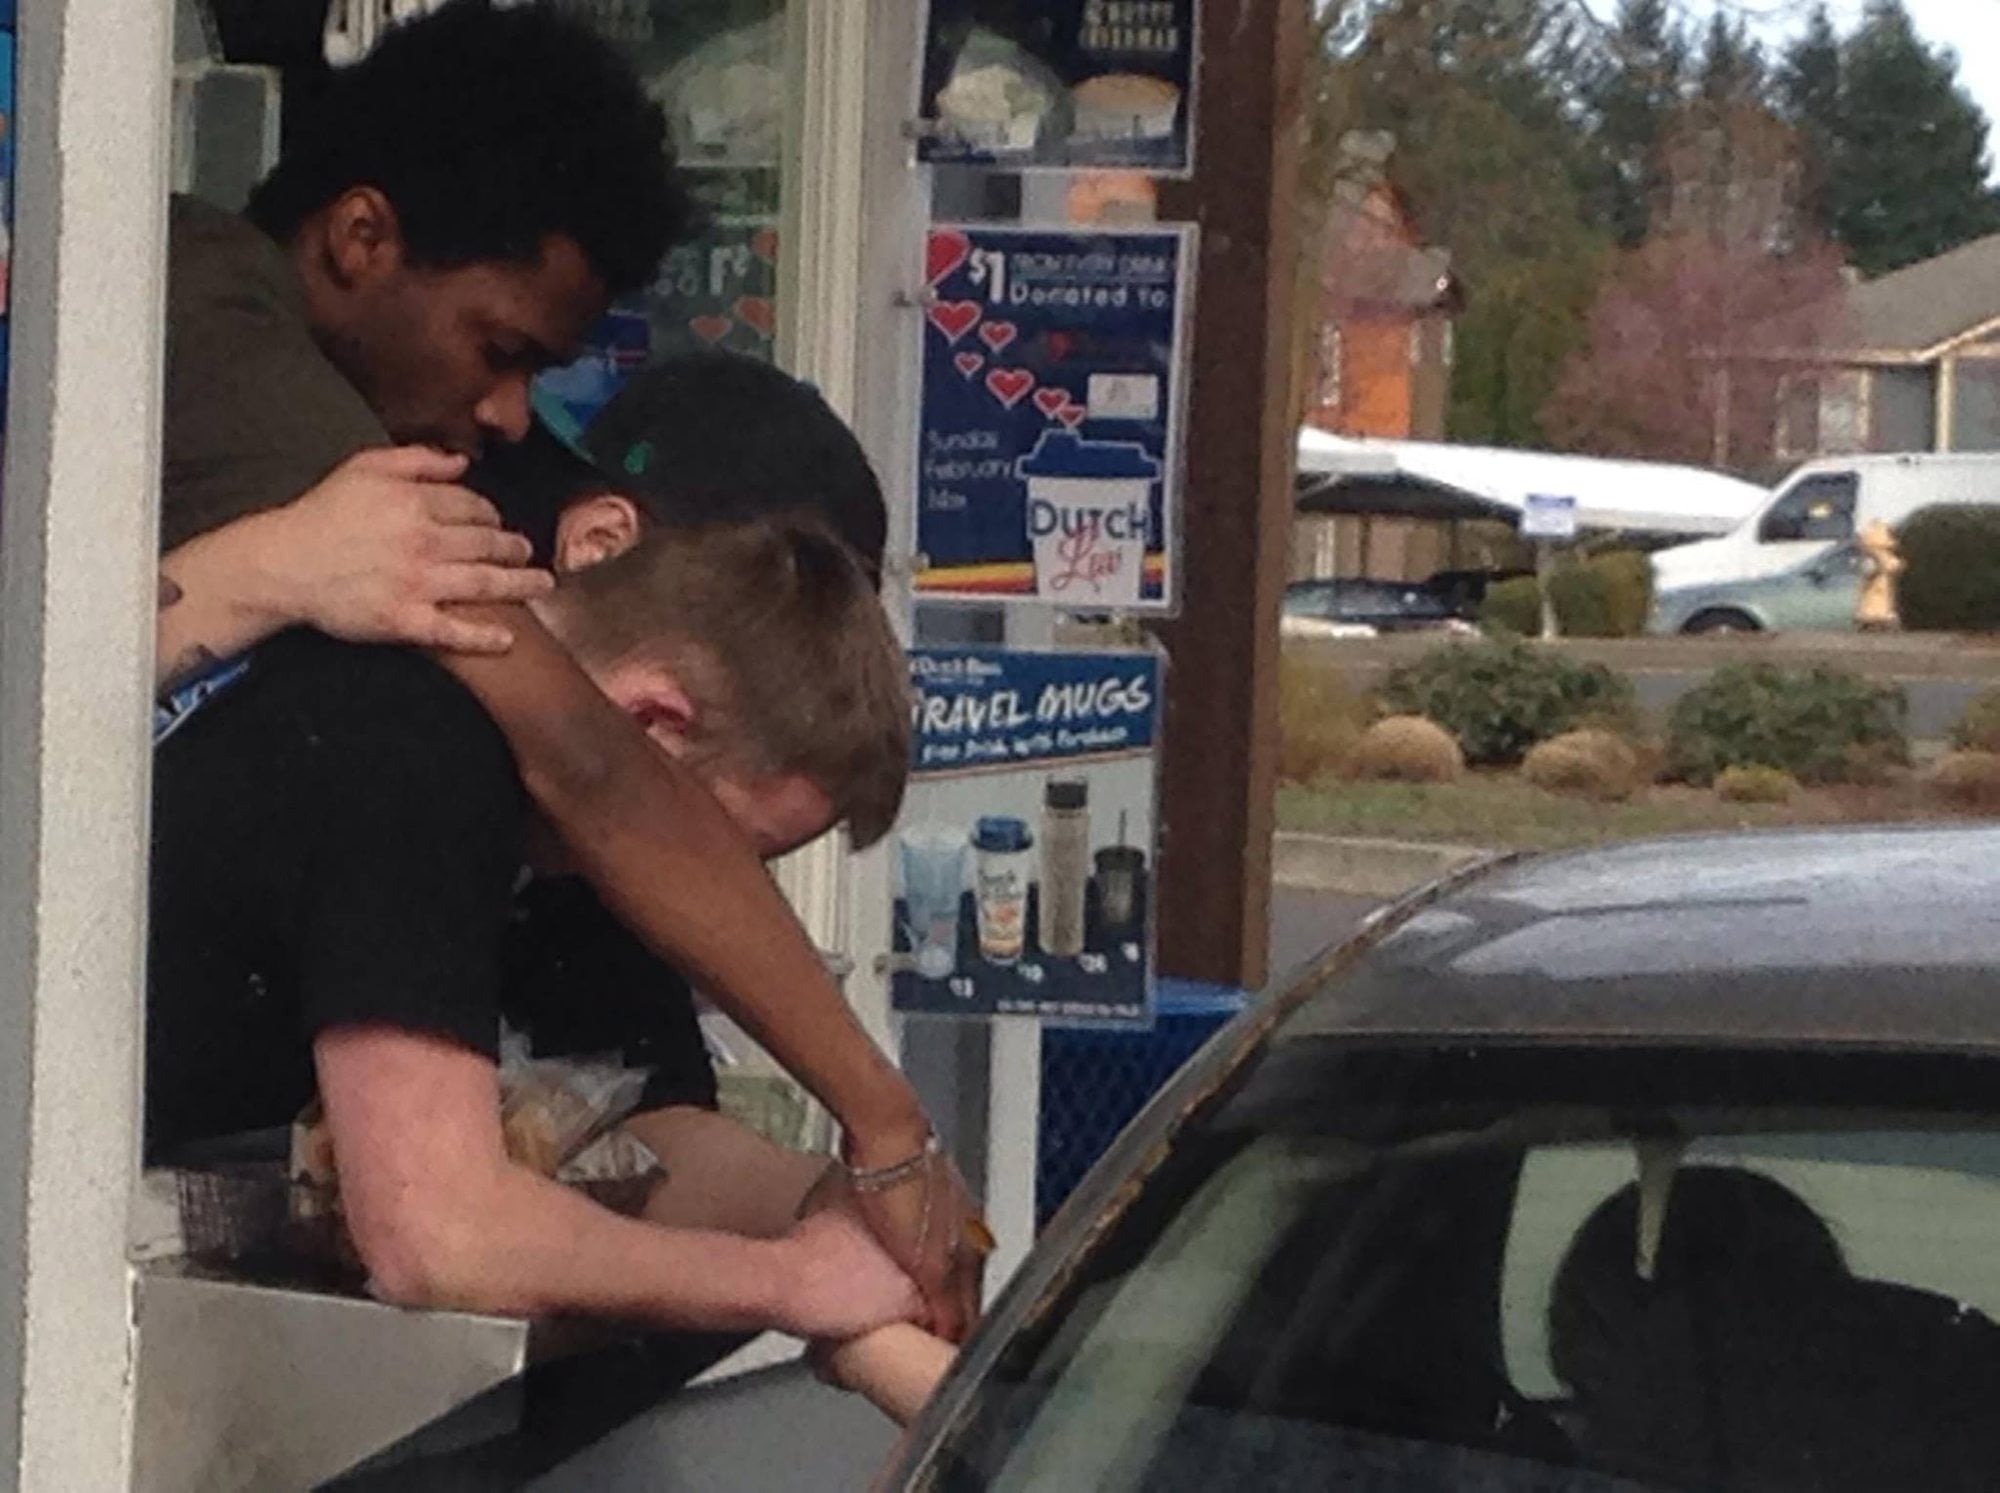 A picture of employees from a Vancouver Dutch Bros. on Northeast 138th Avenue consoling a customer went viral on Facebook after it was posted Saturday.